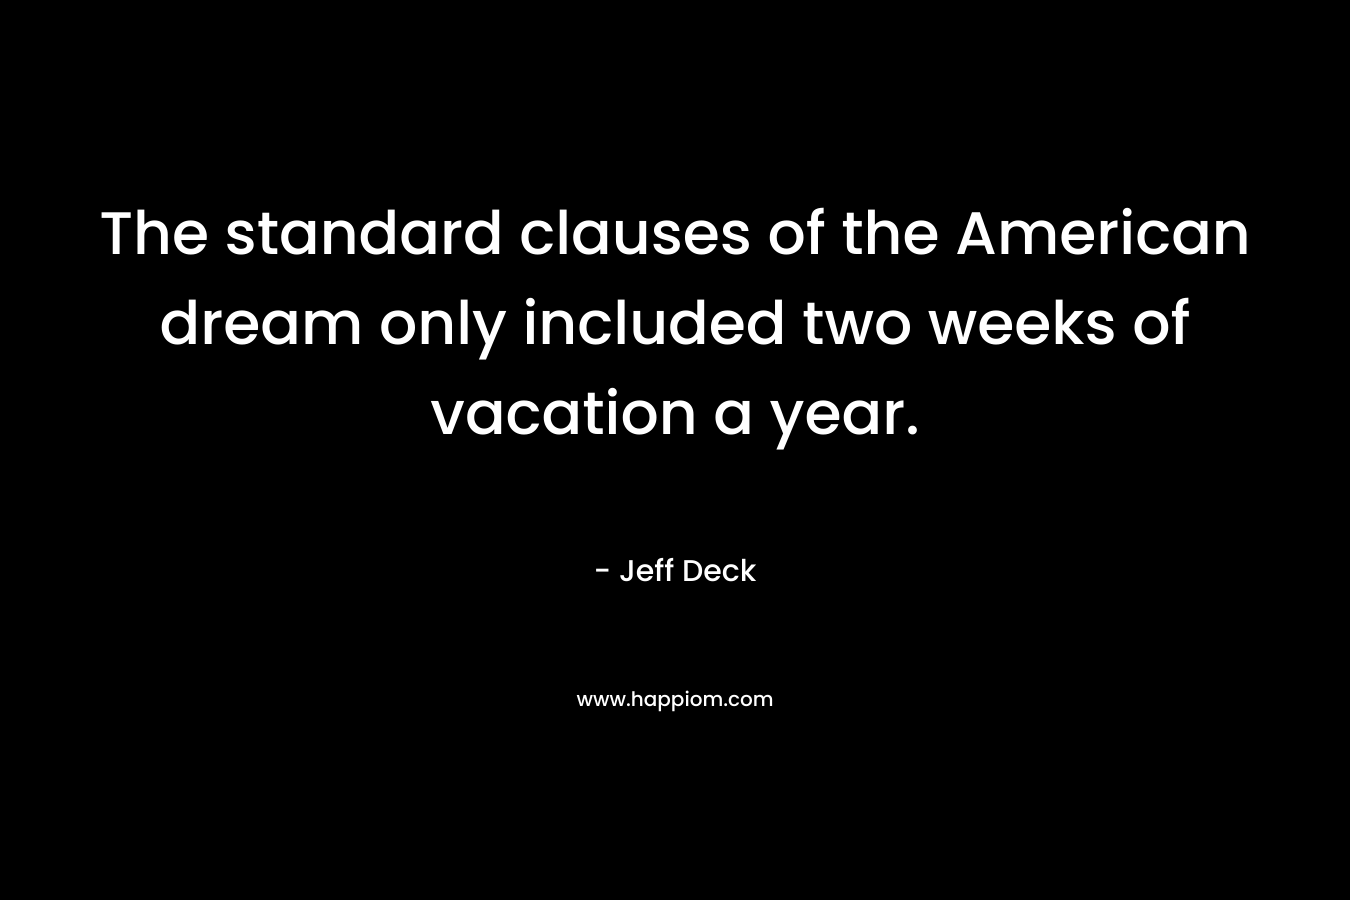 The standard clauses of the American dream only included two weeks of vacation a year. – Jeff Deck